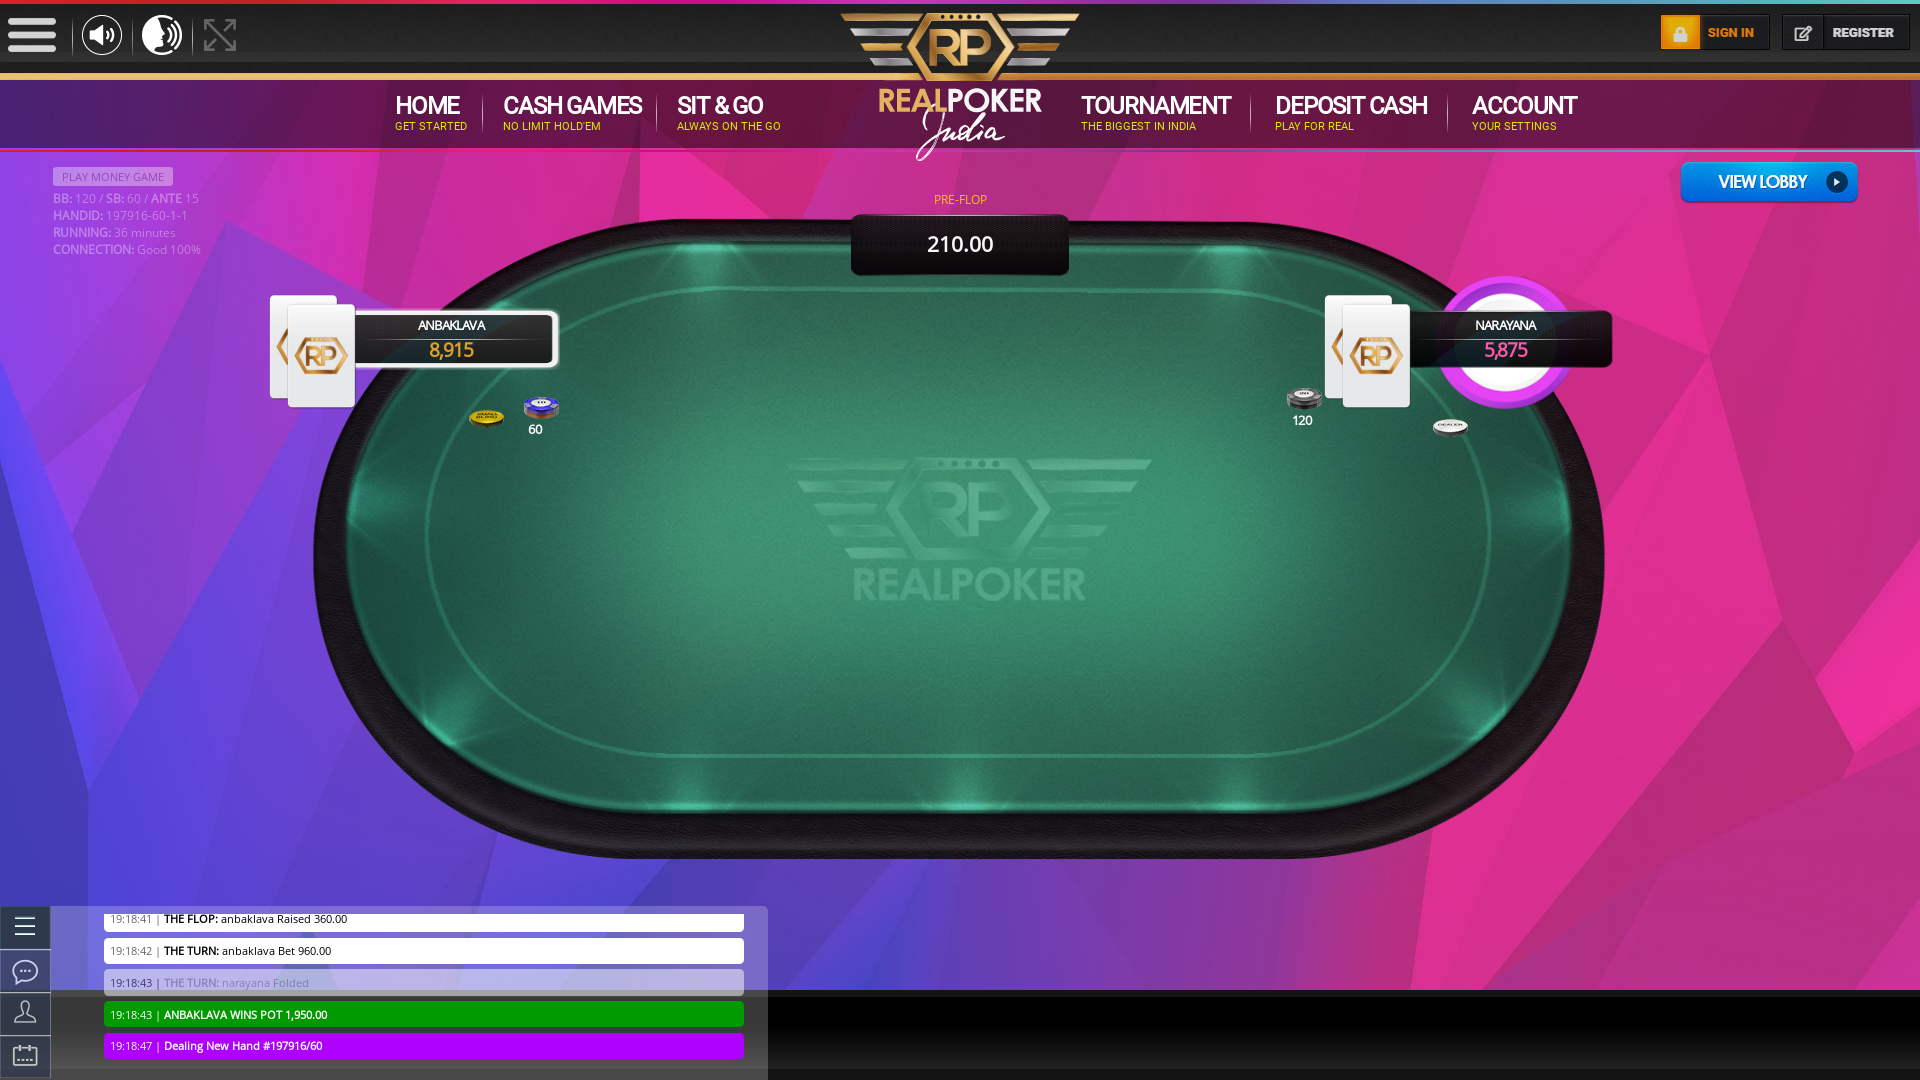 BTM Layout, Bangalore 10 player poker in the 35th minute